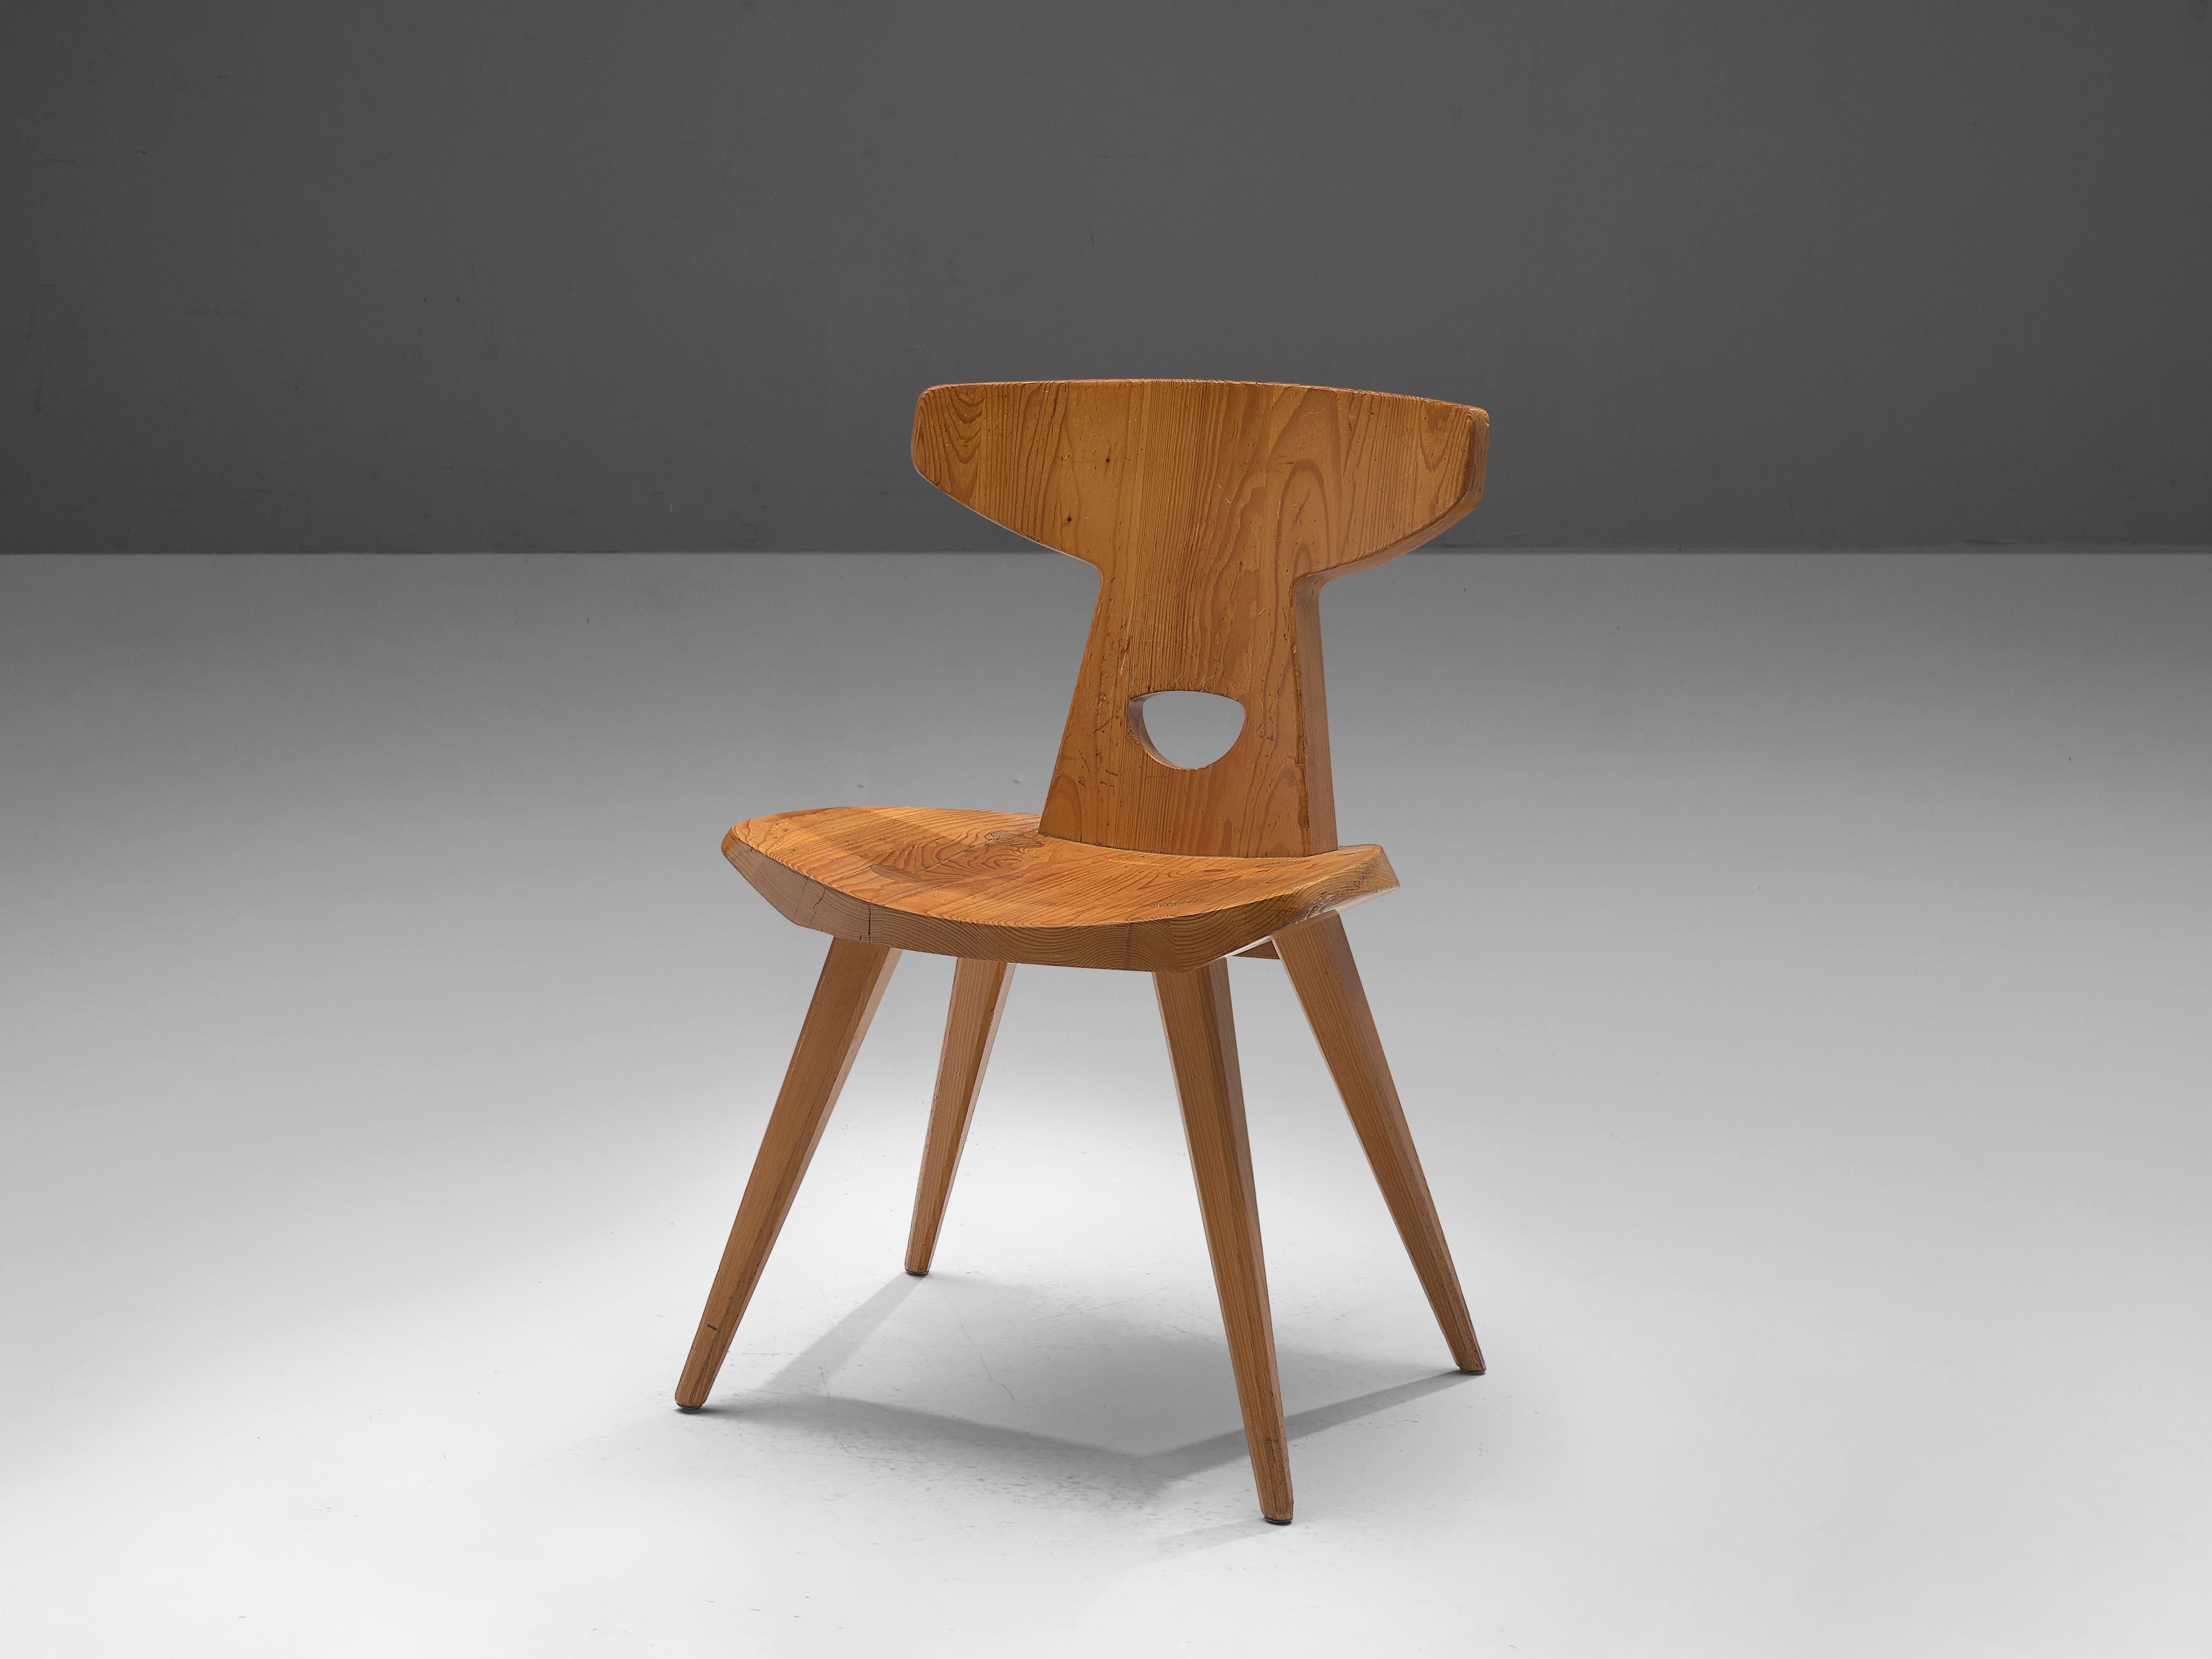 Jacob Kielland-Brandt, dining chair, solid pine, Denmark, 1960s

This remarkable chair holds a strong expression. The backrest has an open look and organically support and optimize the seating comfort. The wood structure has a beautiful grain.